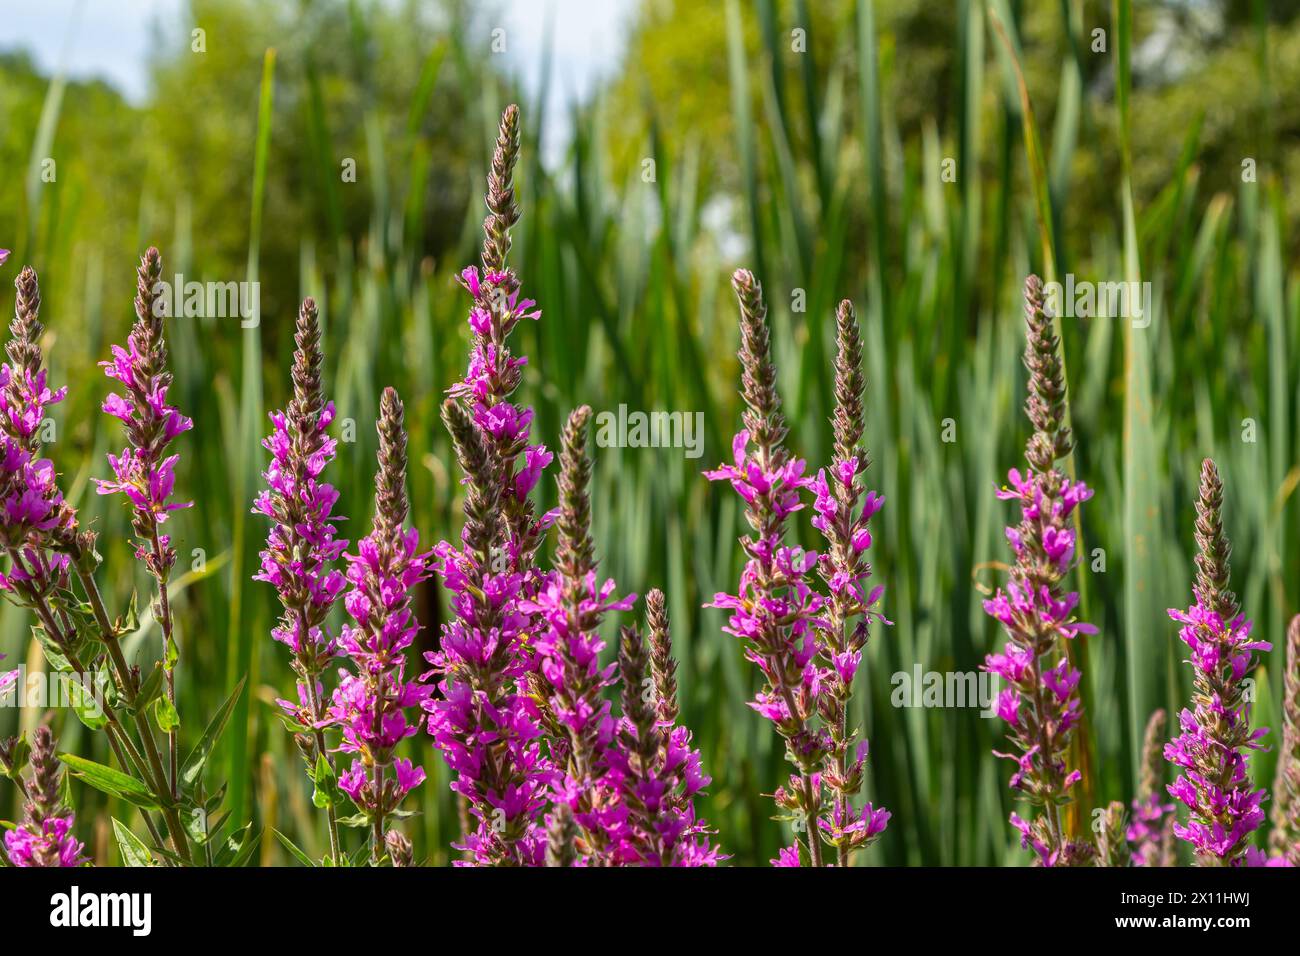 Purple loosestrife Lythrum salicaria inflorescence. Flower spike of plant in the family Lythraceae, associated with wet habitats. Stock Photo